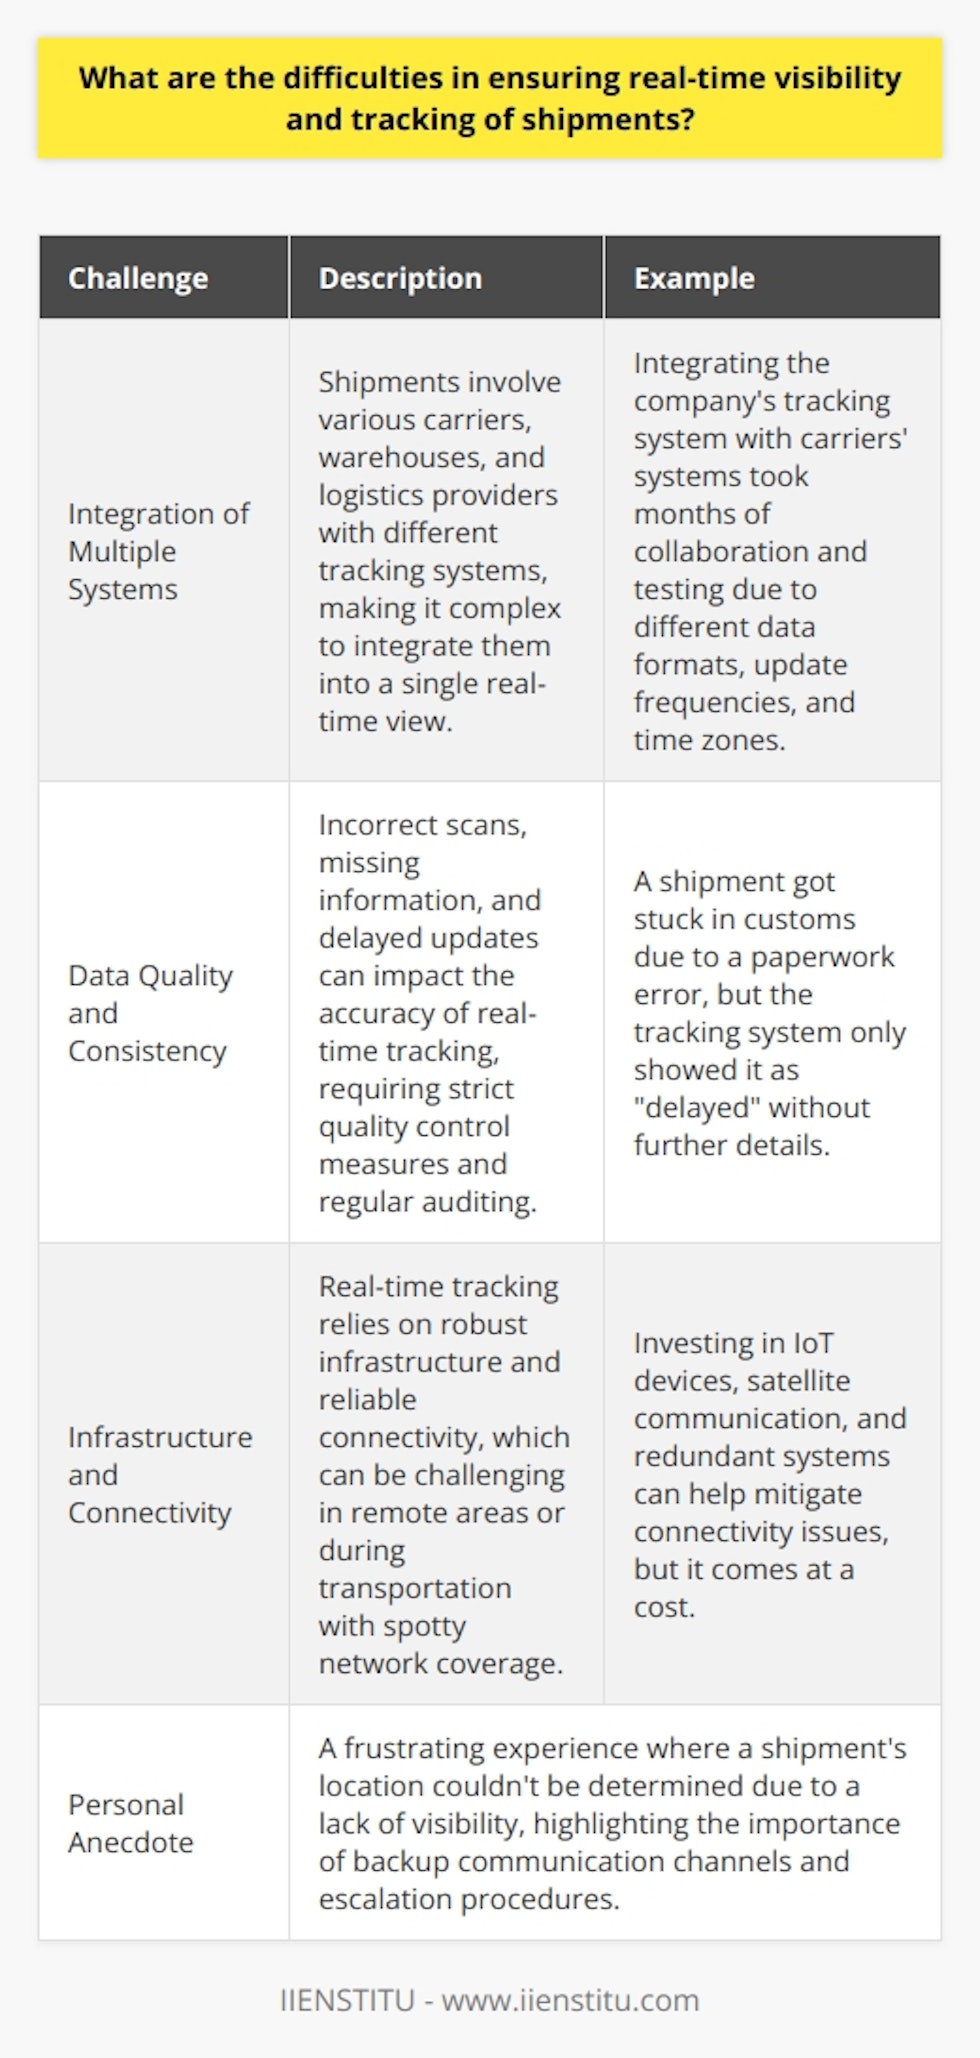 Ensuring real-time visibility and tracking of shipments can be challenging due to several factors. Here are some of the main difficulties: Integration of Multiple Systems Shipments often involve multiple carriers, warehouses, and logistics providers, each with their own tracking systems. Integrating all these different systems into a single, real-time view can be complex and time-consuming. It requires robust APIs, data normalization, and frequent updates to ensure accuracy. My Experience In my previous role, I worked on a project to integrate our companys tracking system with those of our carriers. It took months of collaboration and testing to get everything working smoothly. We had to deal with different data formats, update frequencies, and even time zones. But in the end, it was worth it to provide our customers with real-time visibility. Data Quality and Consistency Even with integrated systems, data quality can be an issue. Incorrect scans, missing information, and delayed updates can all impact the accuracy of real-time tracking. Ensuring data consistency across different touchpoints and systems requires strict quality control measures and regular auditing. Infrastructure and Connectivity Real-time tracking relies on a robust infrastructure and reliable connectivity. This can be challenging in remote areas or during transportation, where network coverage may be spotty. Investing in IoT devices, satellite communication, and redundant systems can help mitigate these issues, but it comes at a cost. Personal Anecdote I remember a time when one of our shipments got stuck in customs due to a paperwork error. Our tracking system showed the shipment as  delayed,  but we couldnt get any more information. It took multiple phone calls and emails to finally locate the shipment and get it moving again. It was a frustrating experience, but it taught me the importance of having backup communication channels and escalation procedures in place. Despite these challenges, real-time visibility is increasingly becoming a must-have in the logistics industry. With the right technology, processes, and partnerships in place, its possible to overcome these difficulties and provide customers with the transparency and control they expect.